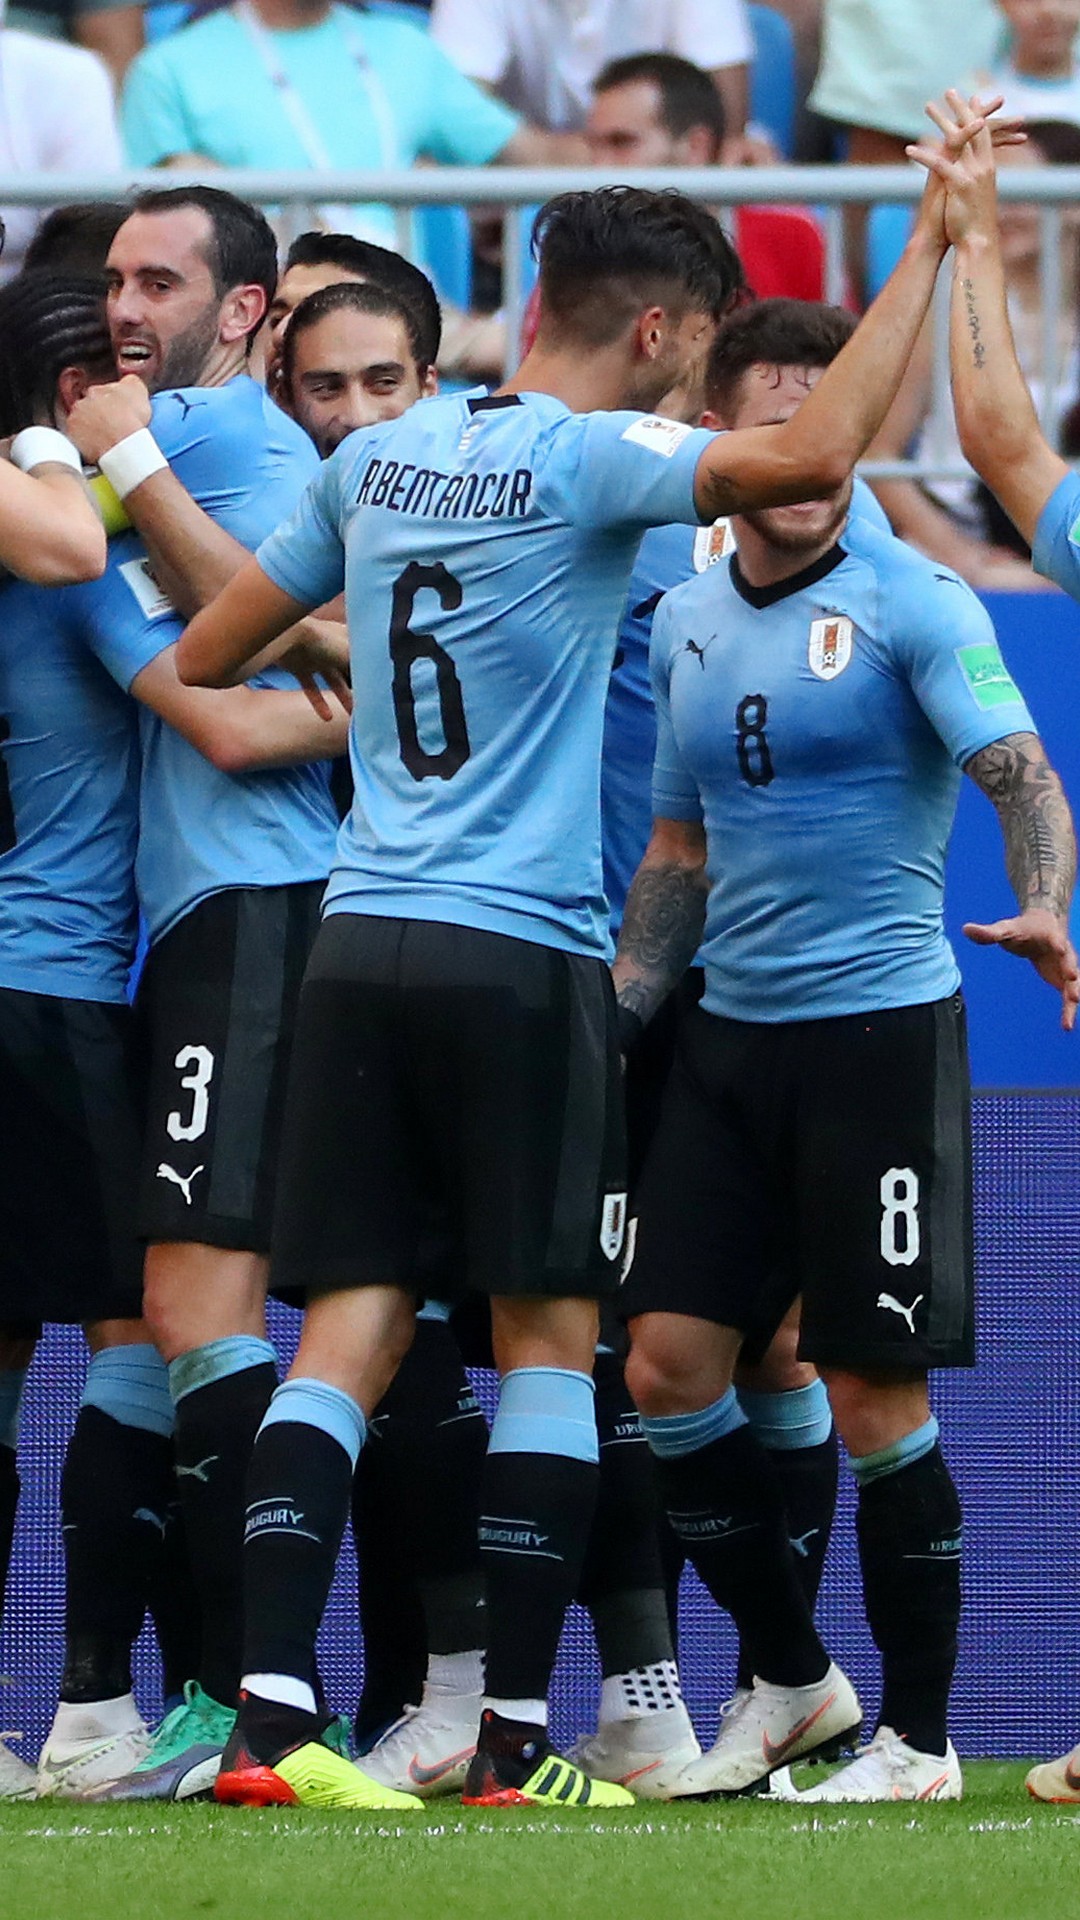 Wallpaper Uruguay National Team Android with resolution 1080X1920 pixel. You can make this wallpaper for your Android backgrounds, Tablet, Smartphones Screensavers and Mobile Phone Lock Screen